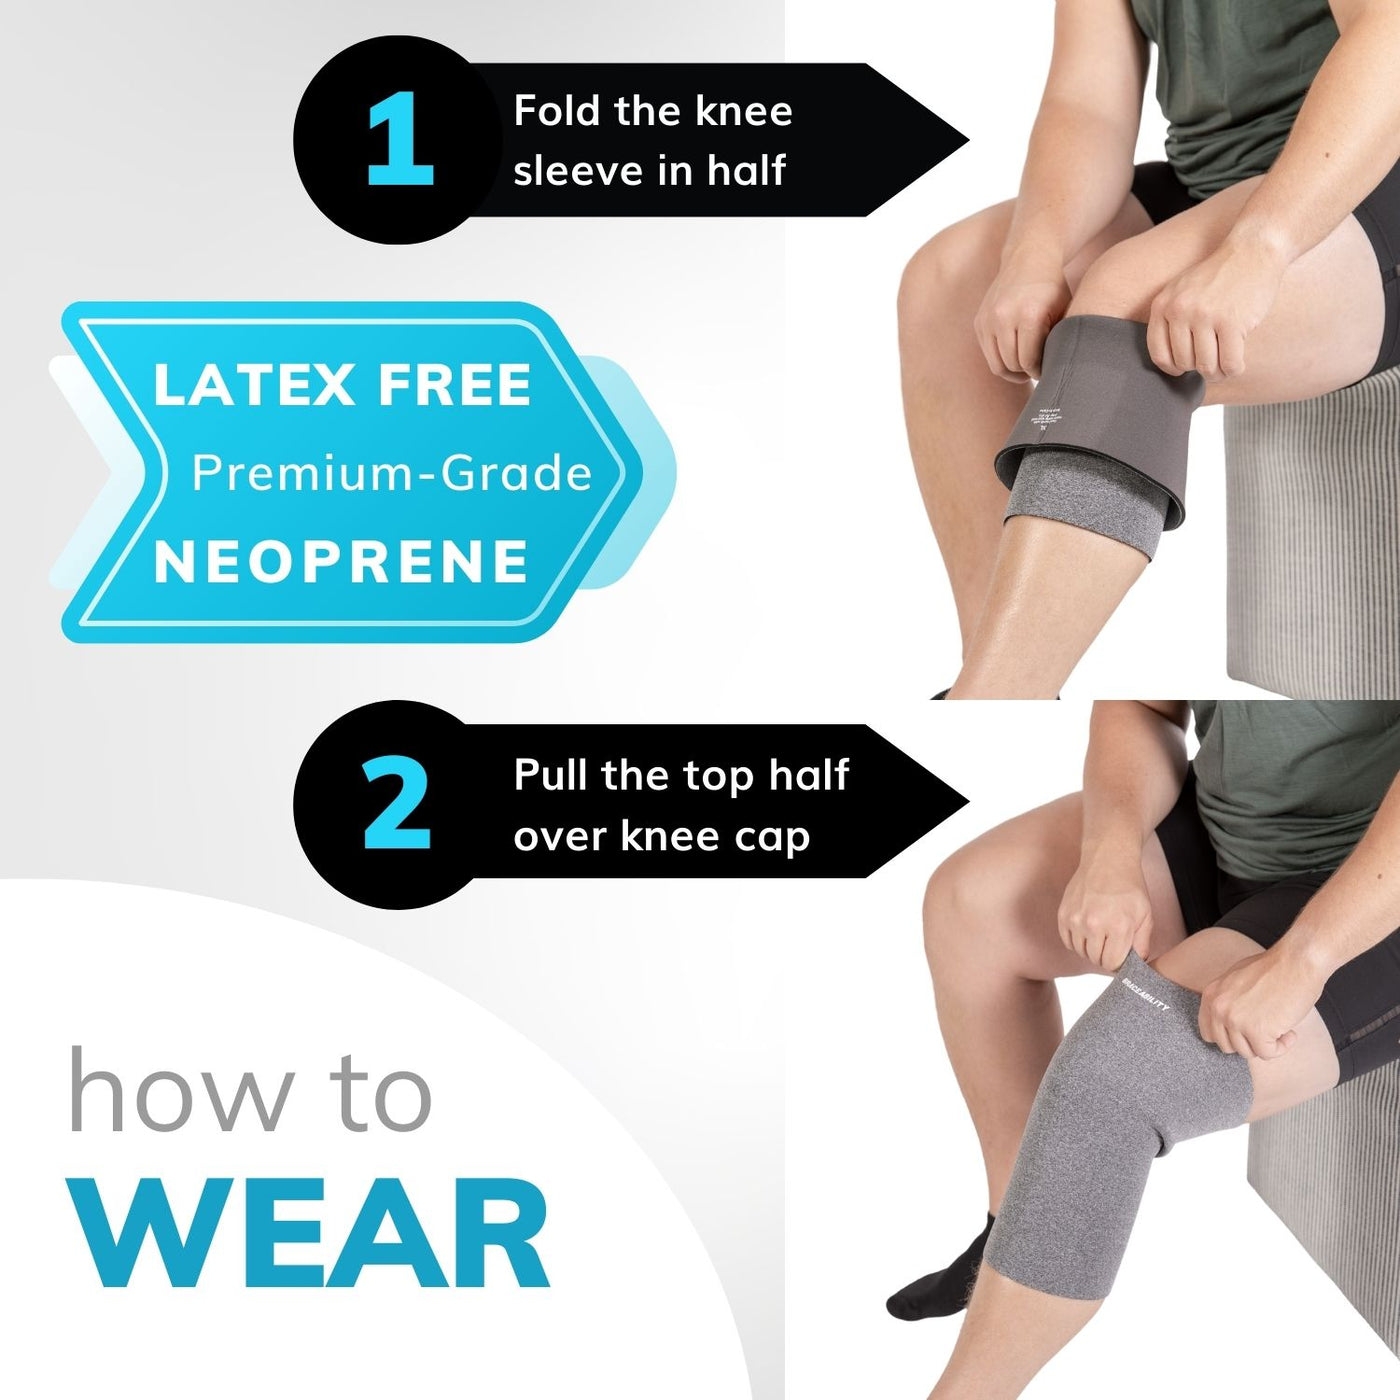 The latex-free neoprene knee support for big legs can easily be applied with big legs by folding in half before pulling up leg